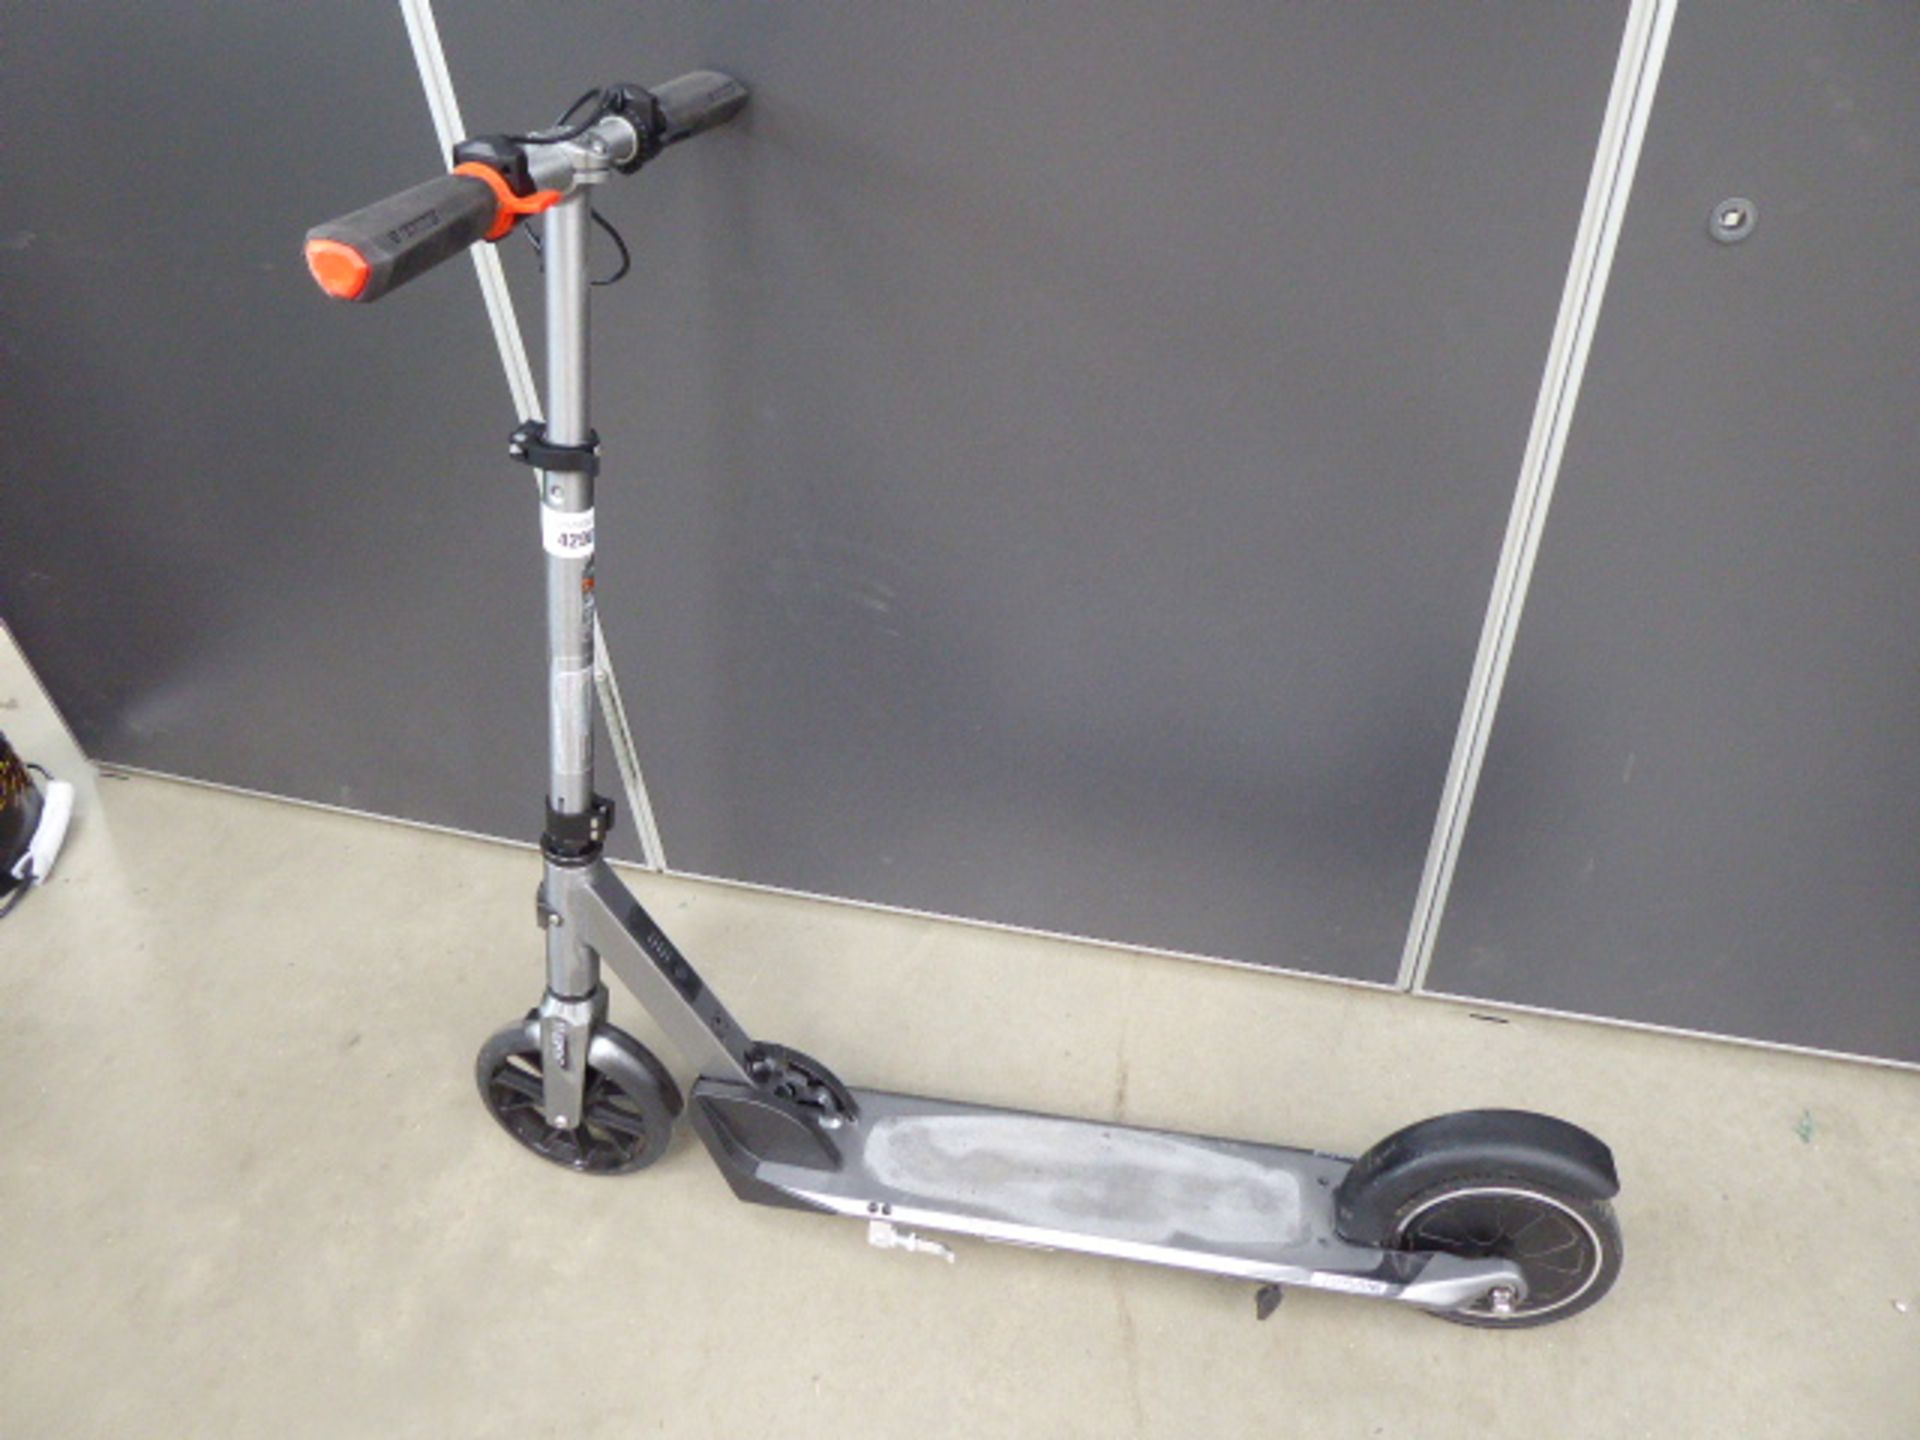 Razor electric scooter no charger